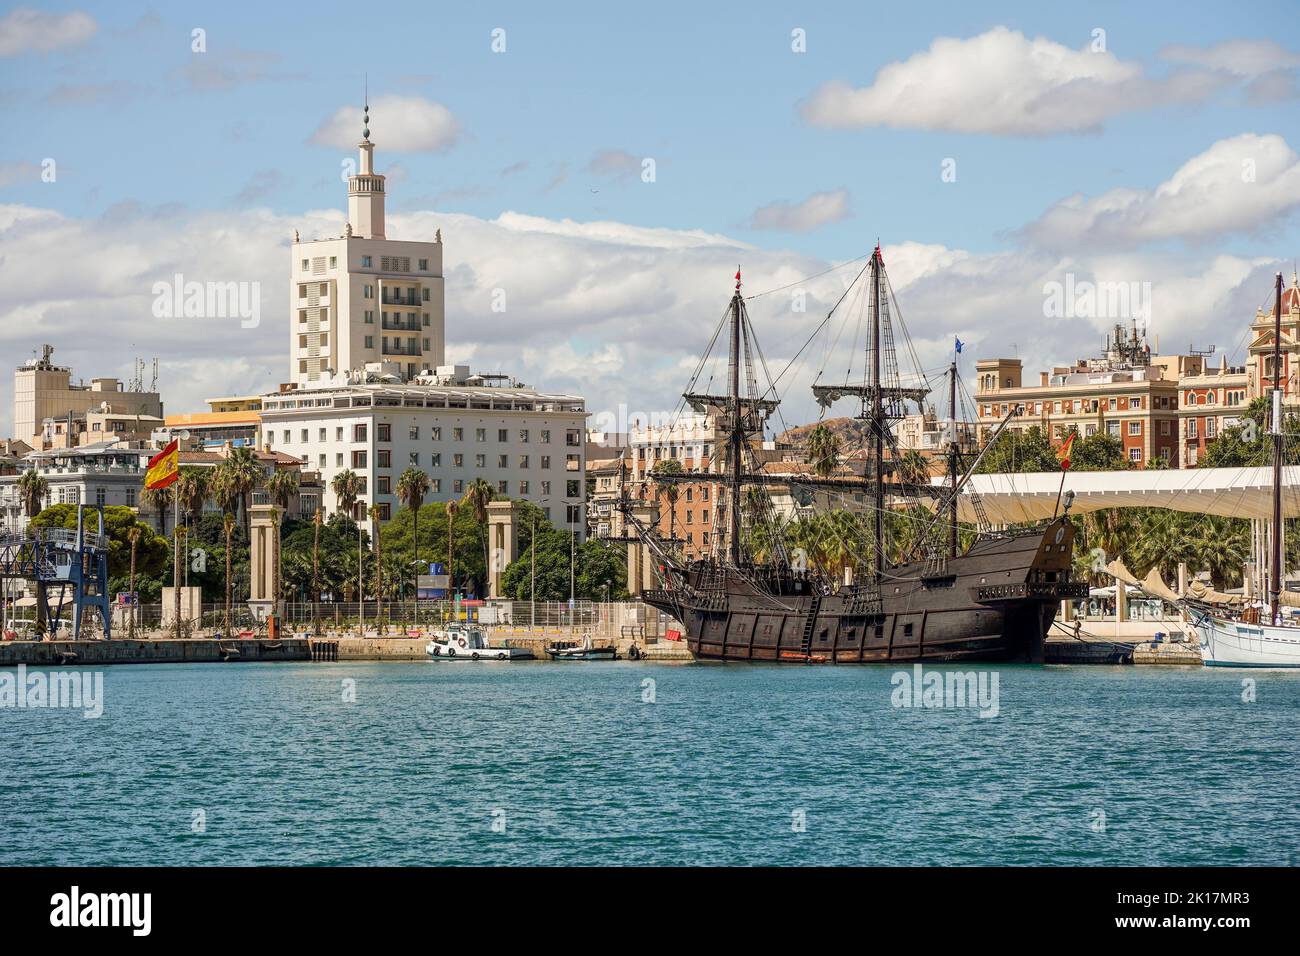 Three replicas of old sailing ships, Nao Victoria , Galeon Andalucia, Pascual Flores, moored in the port of Malaga, Andalucia, Spain. Stock Photo